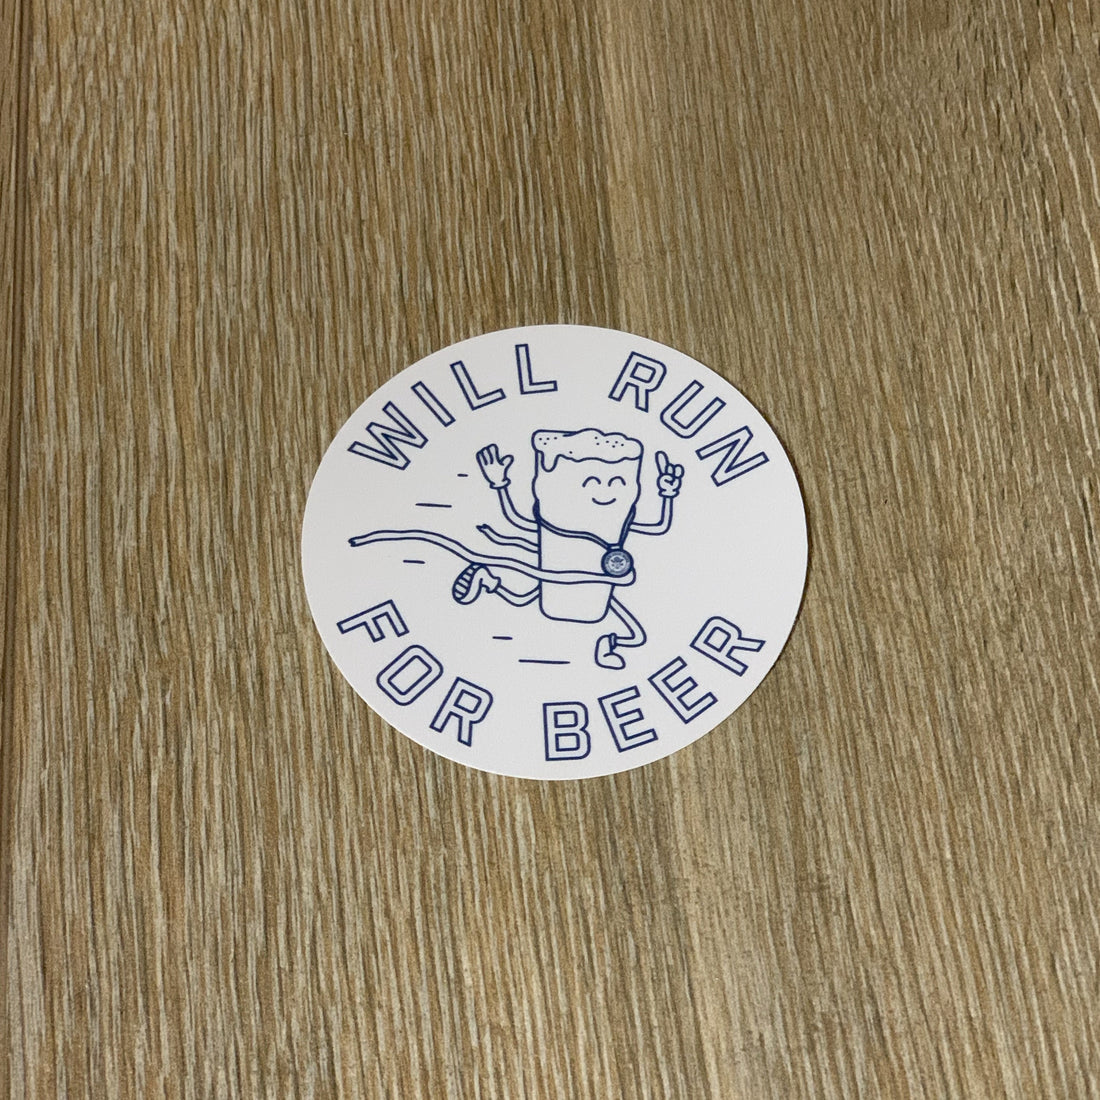 Some Good Hops Will Run For Beer Sticker